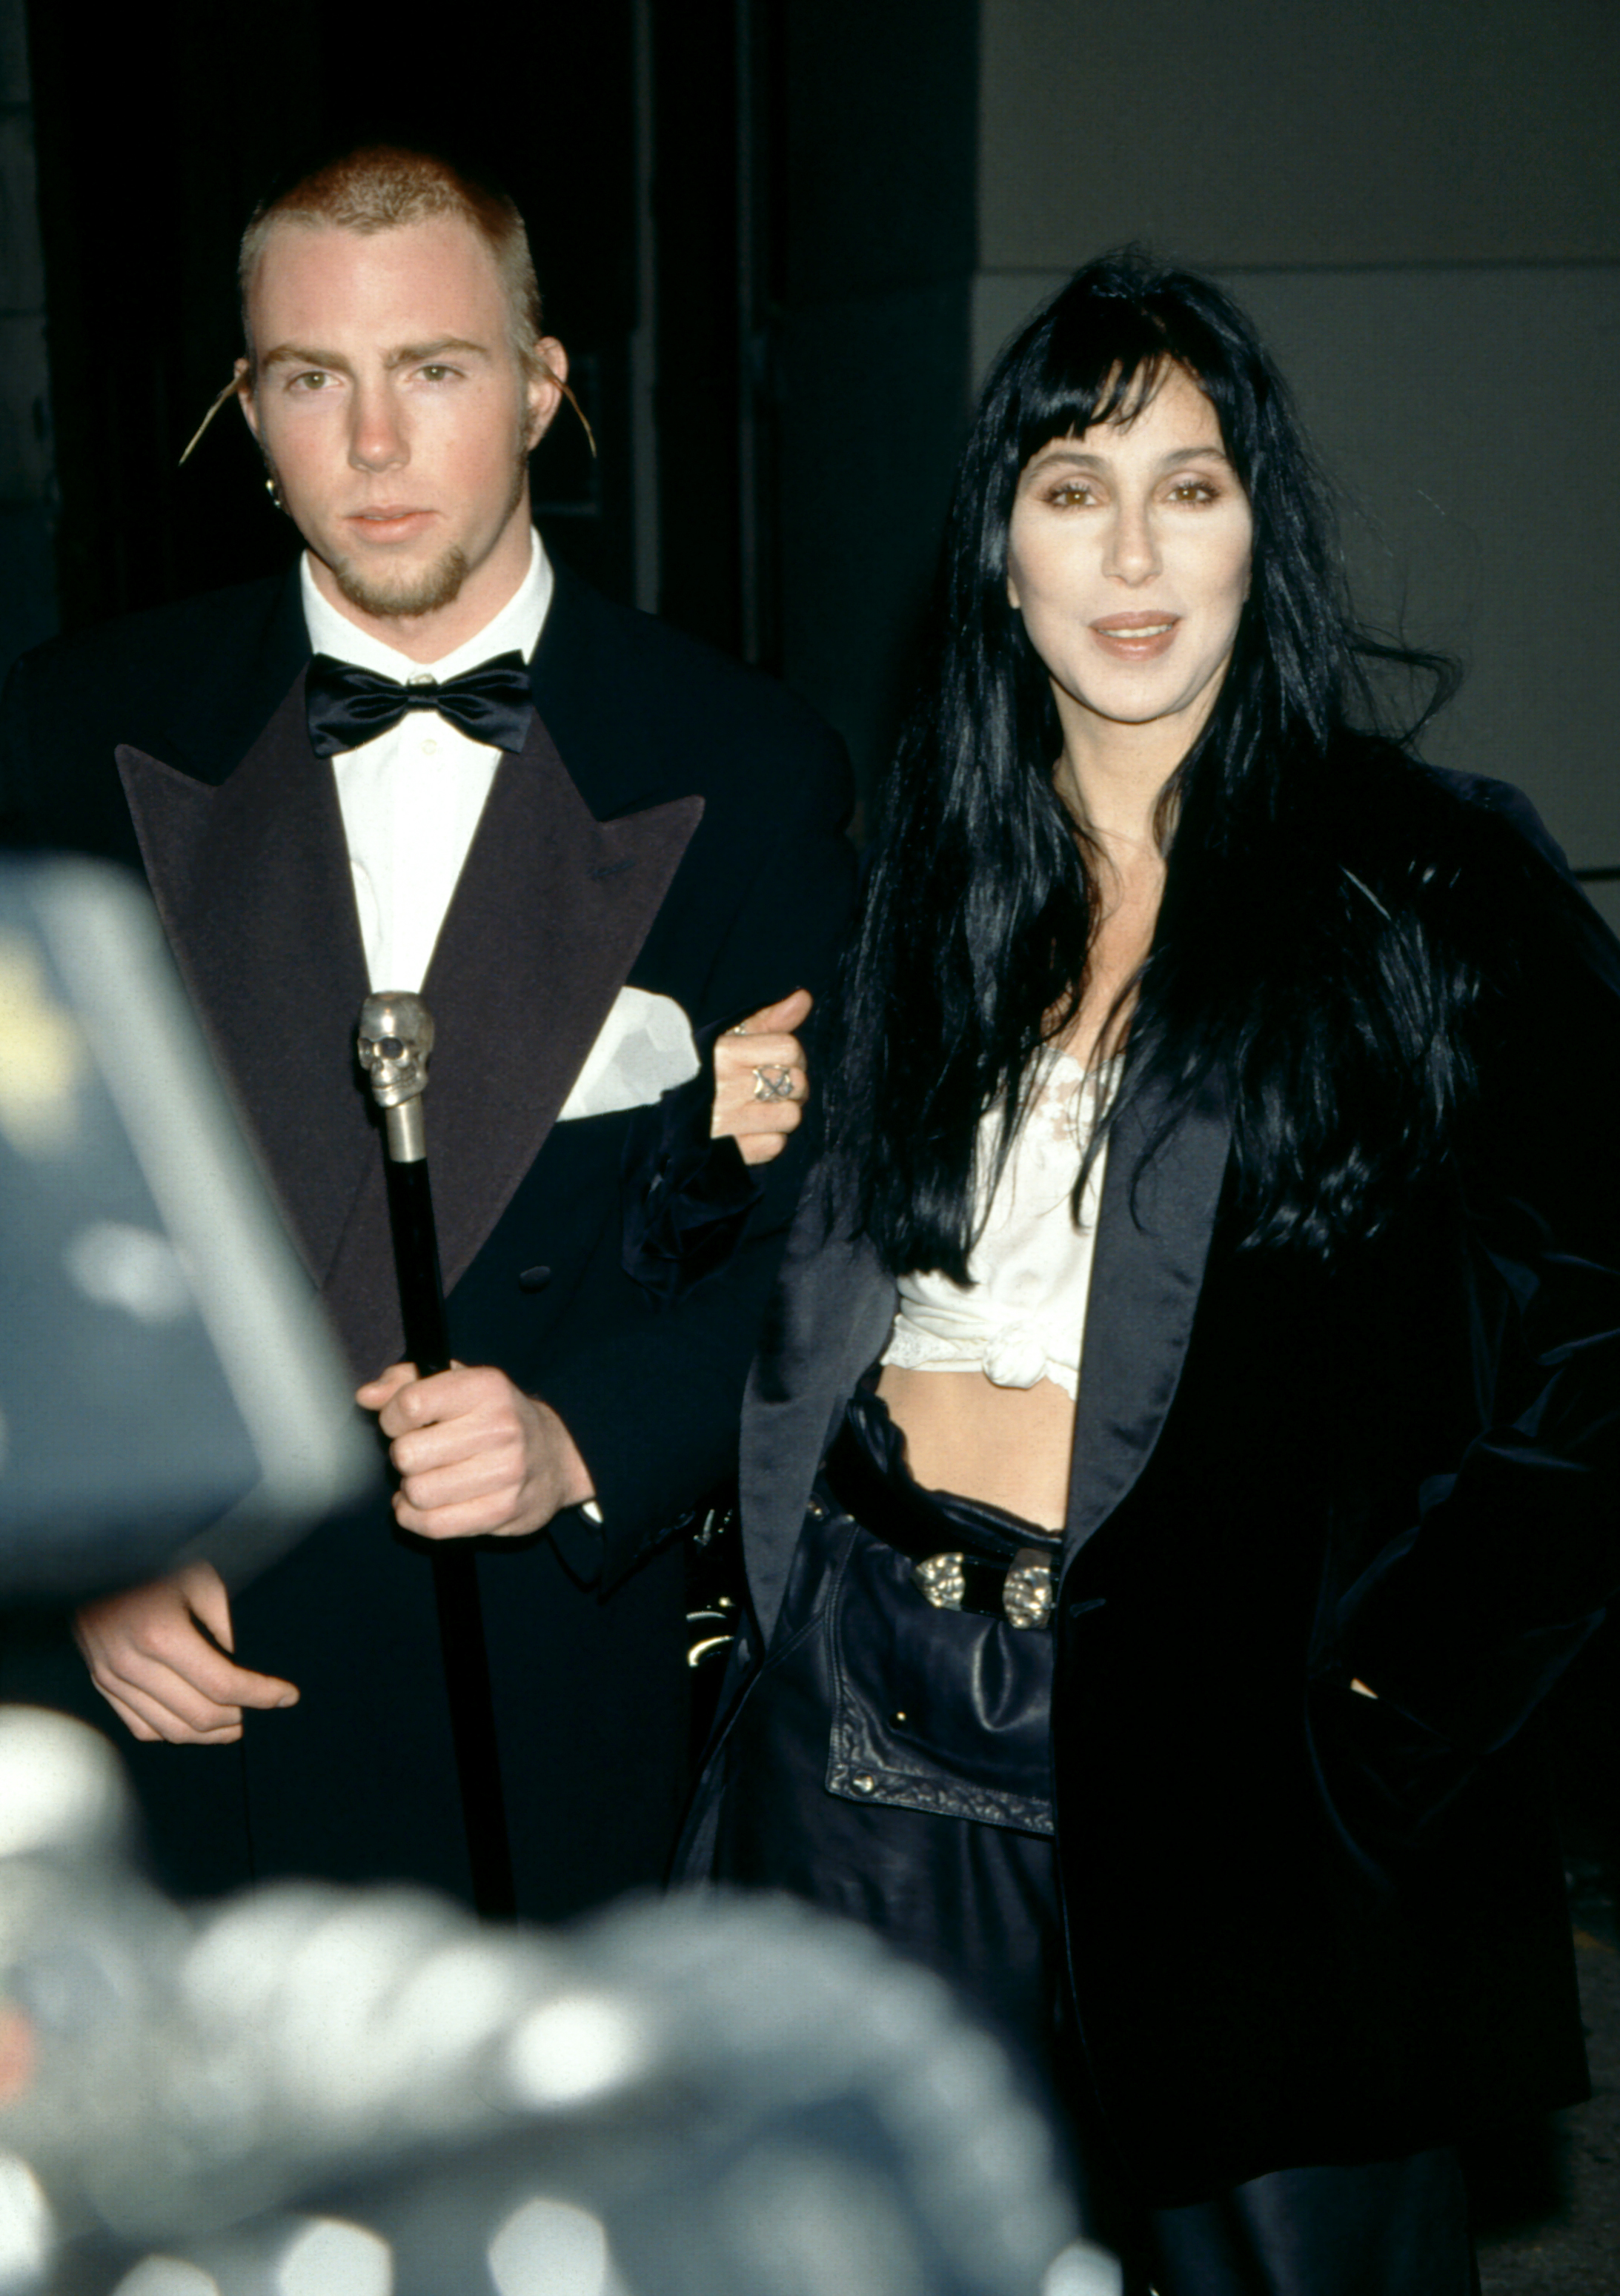 Elijah Blue Allman and Cher attend the 5th Annual Fire and Ice Ball to benefit Revlon UCLA Women Cancer Center on December 7, 1994, at the 20th Century Fox Studios in Century City, California. | Source: Getty Images